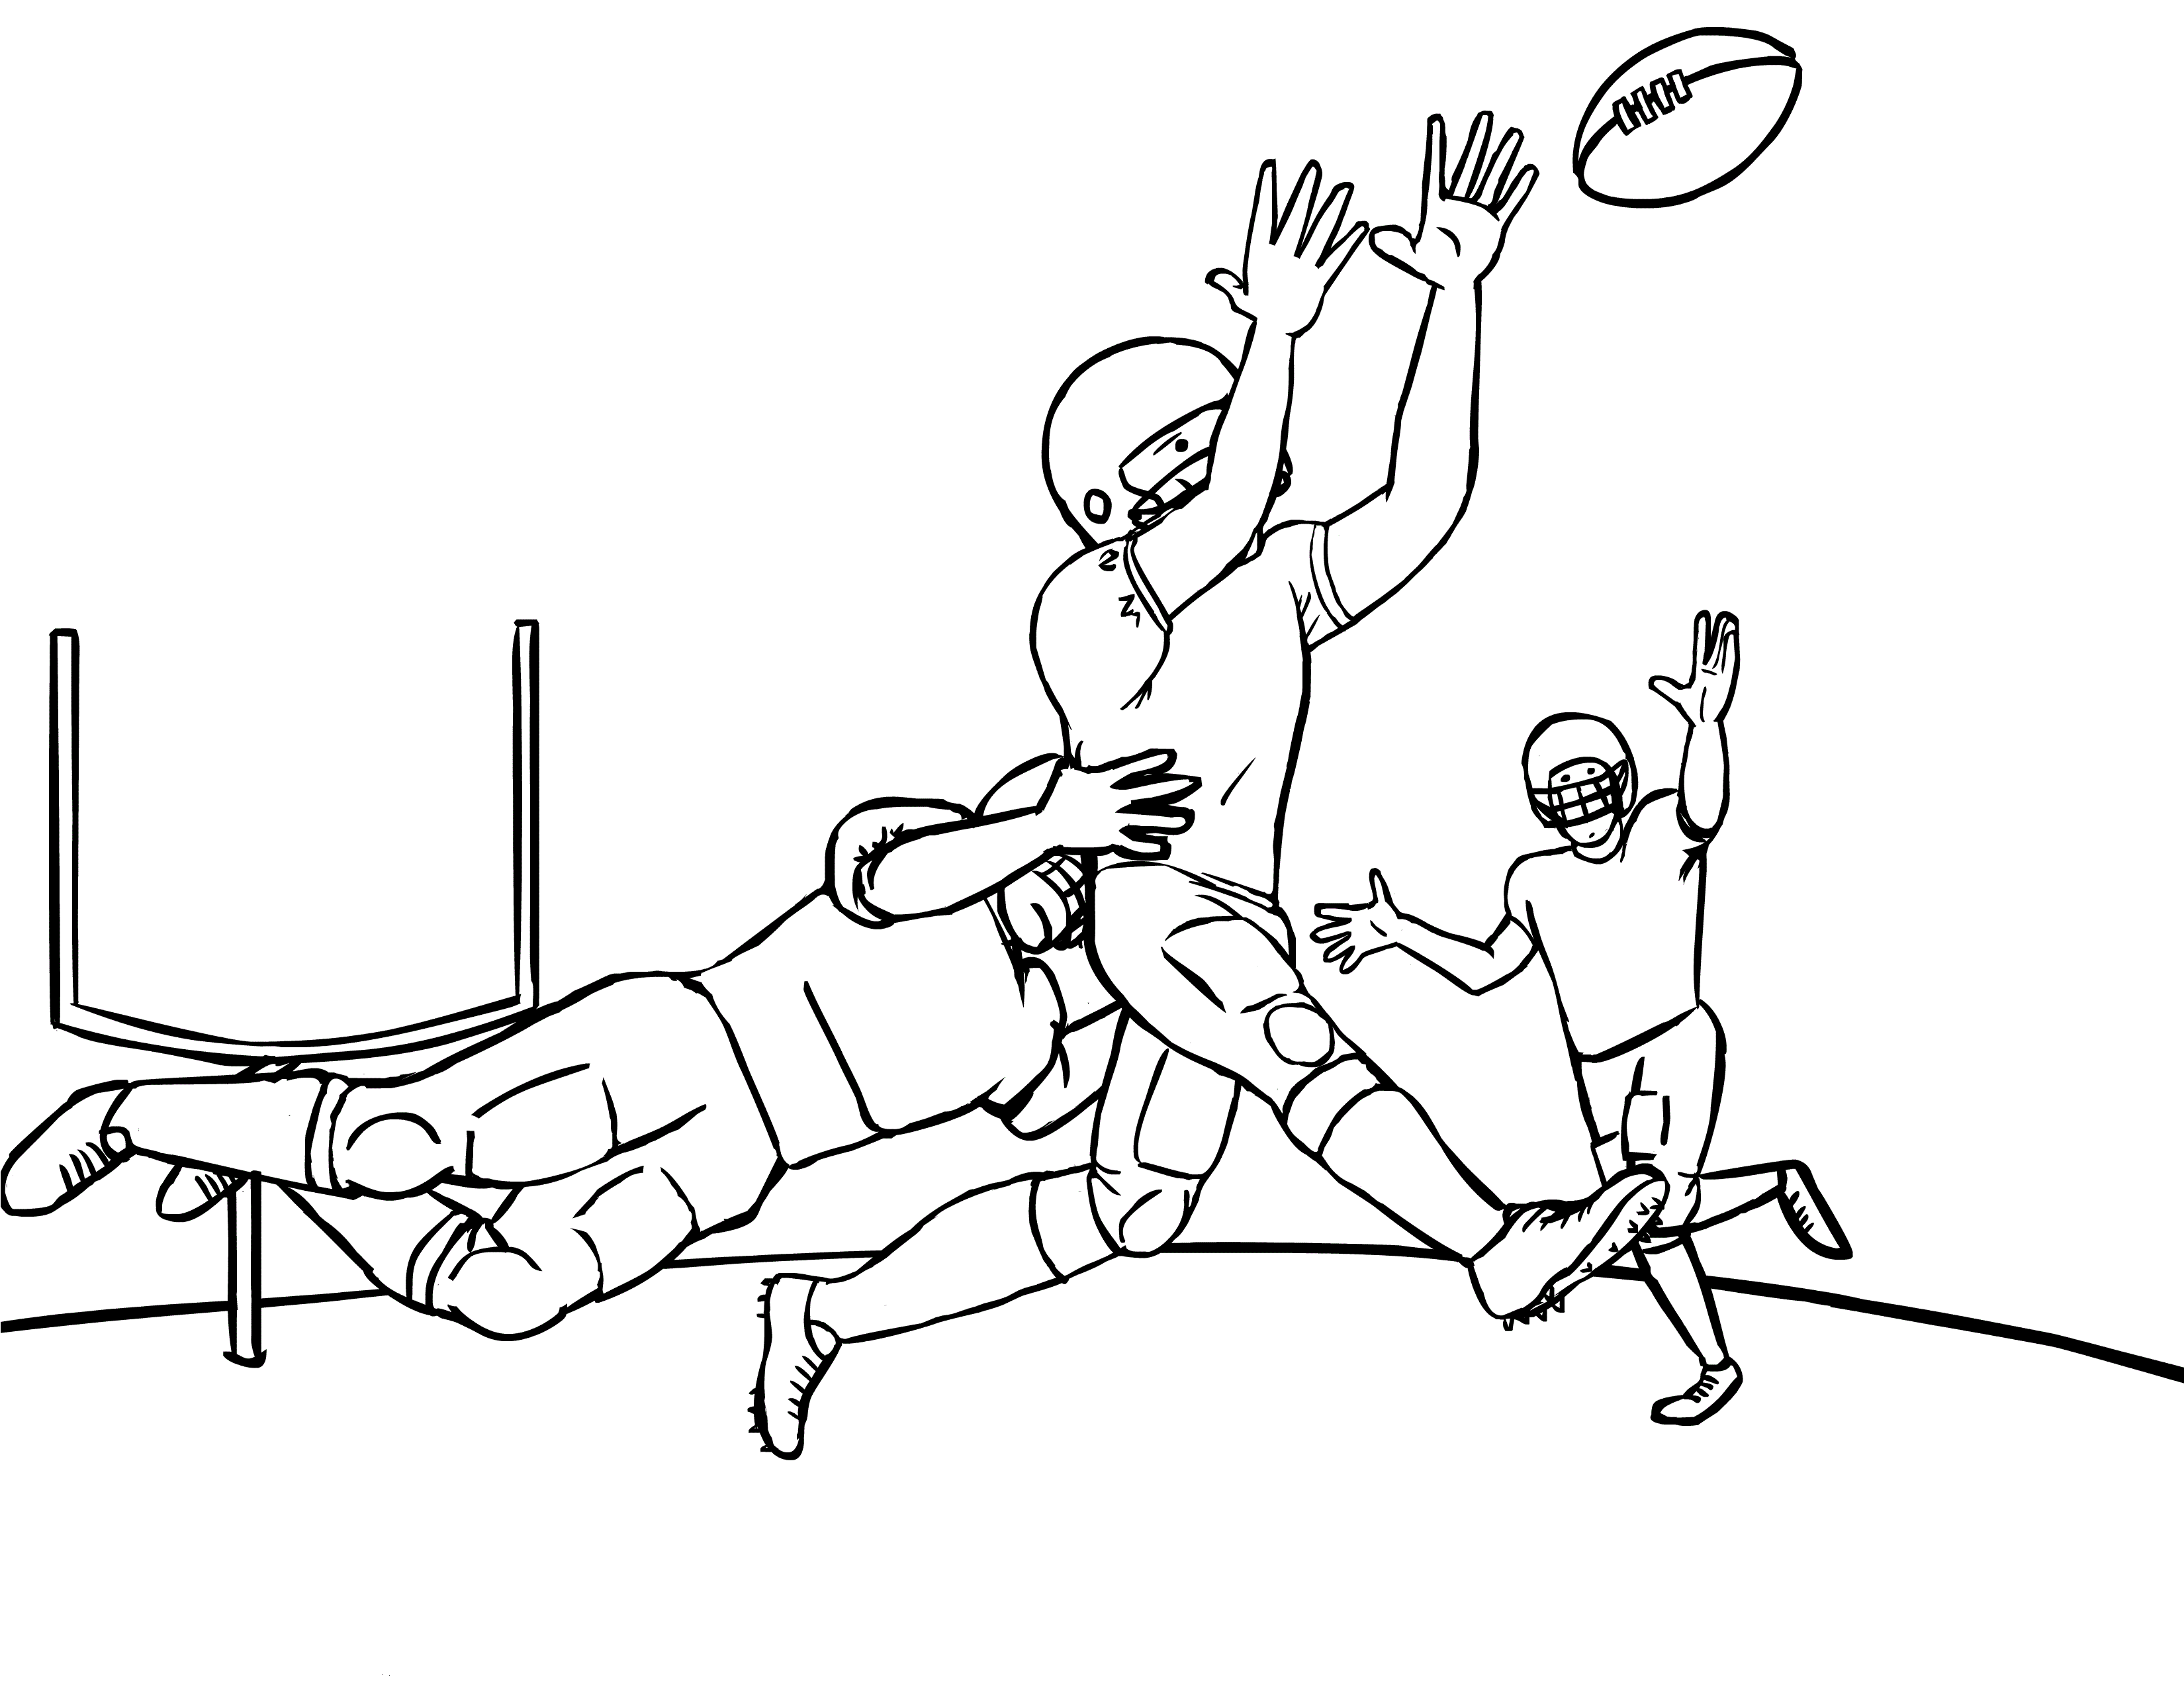 Coloring Pages to Print Soccer